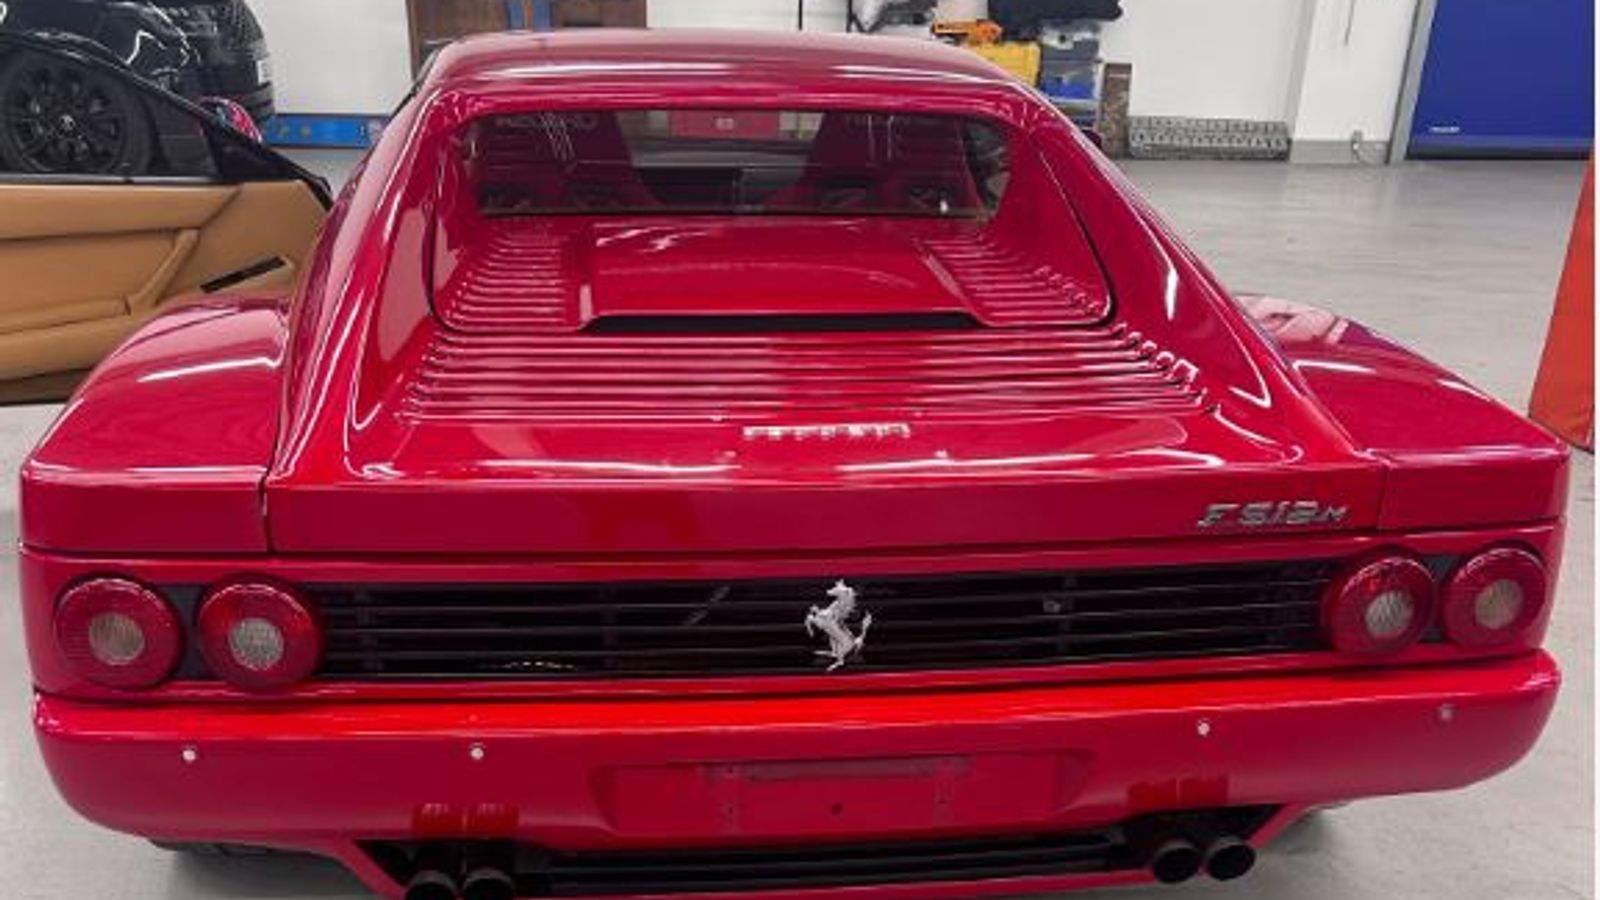 ferrari stolen from f1 driver in 1995 recovered by police nearly three decades later